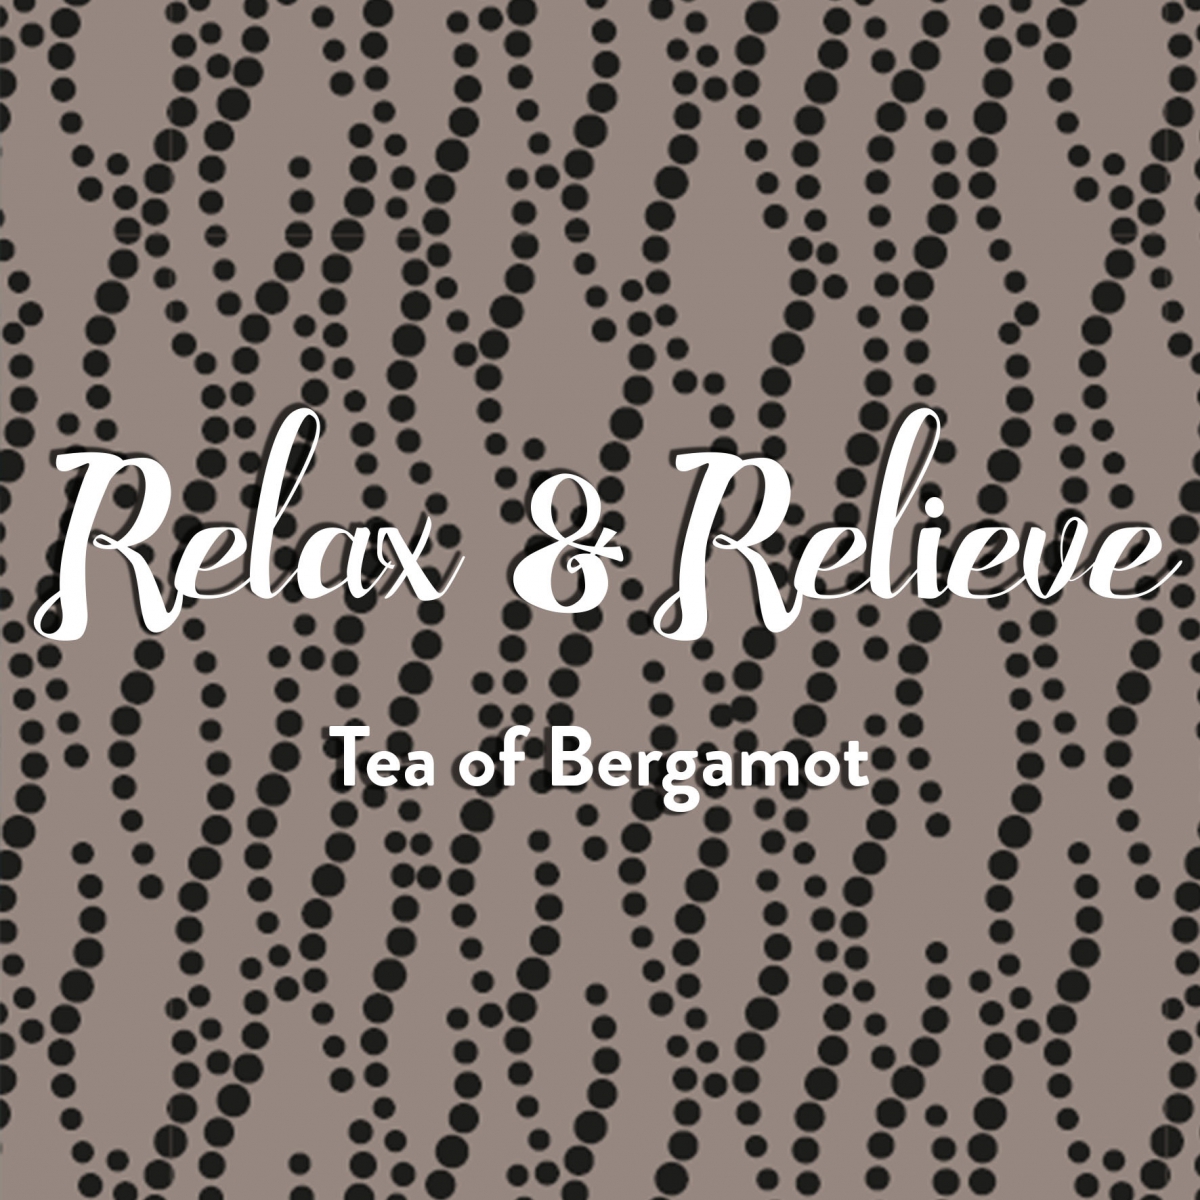 scented-candles-Spaas-Relax-Relieve-scent-bergamot-tea